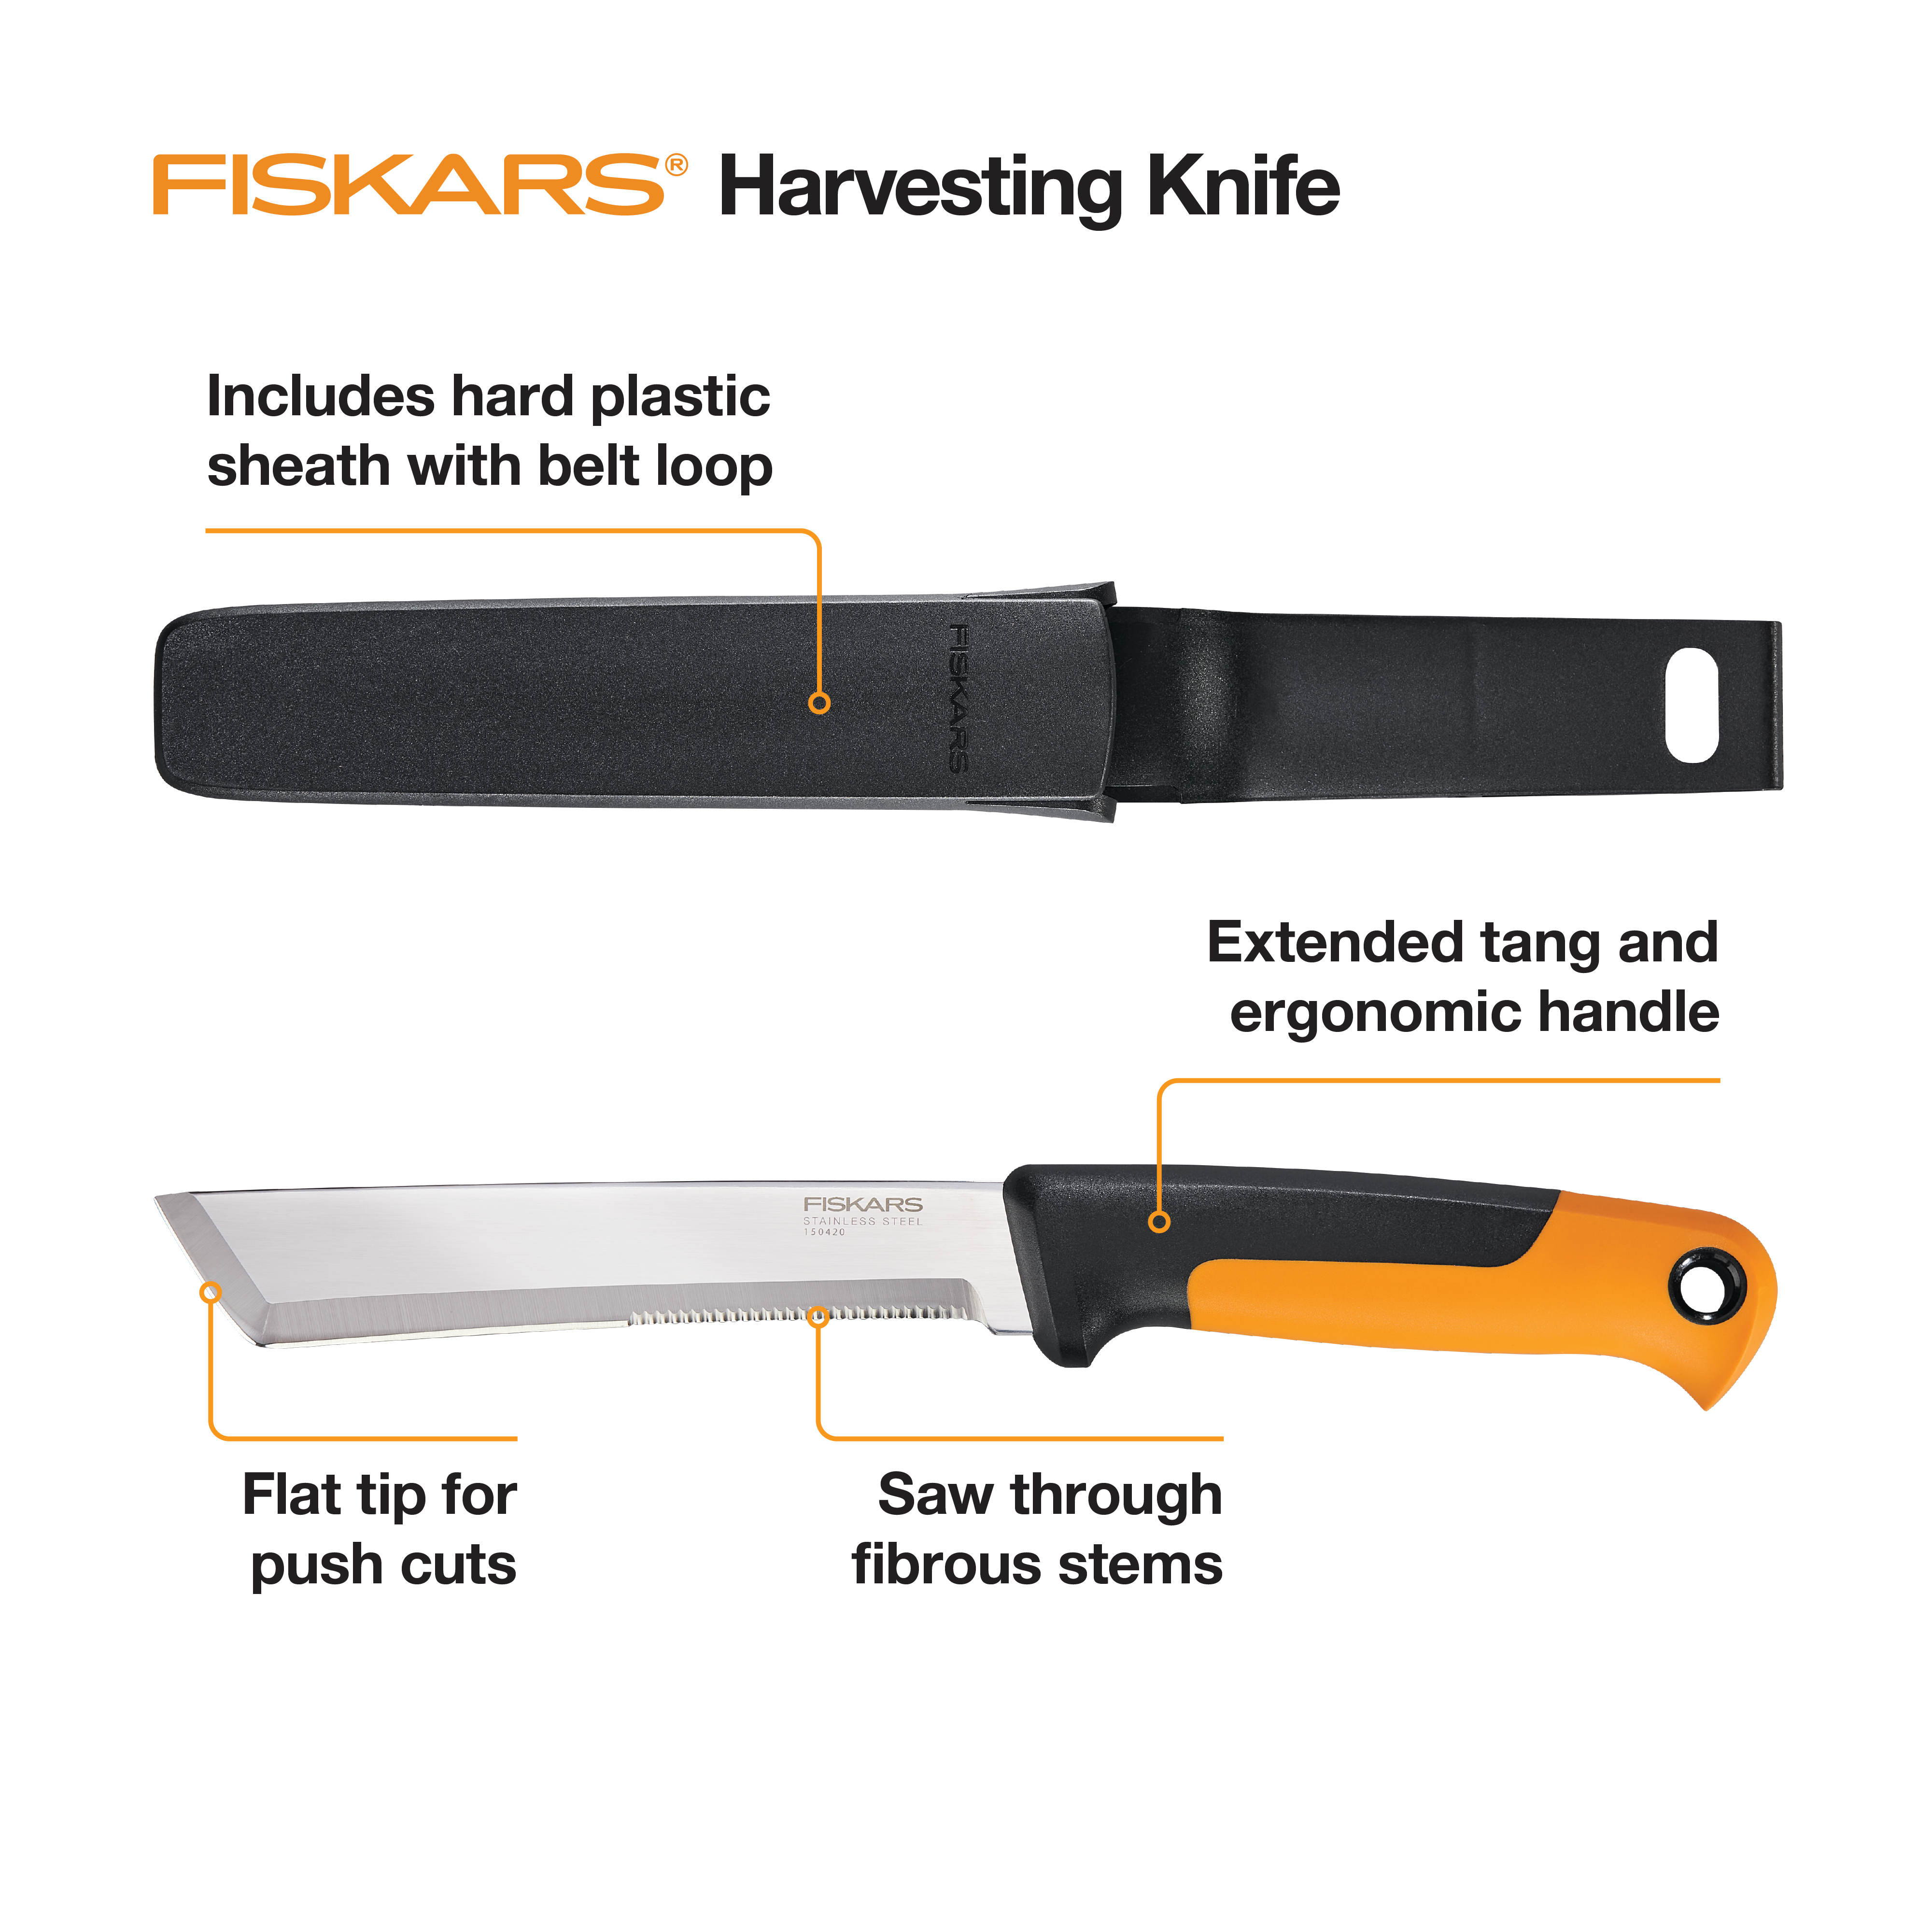 Fiskars 18" Harvesting Knife with Stainless Steel Blade and Sheath - image 4 of 10